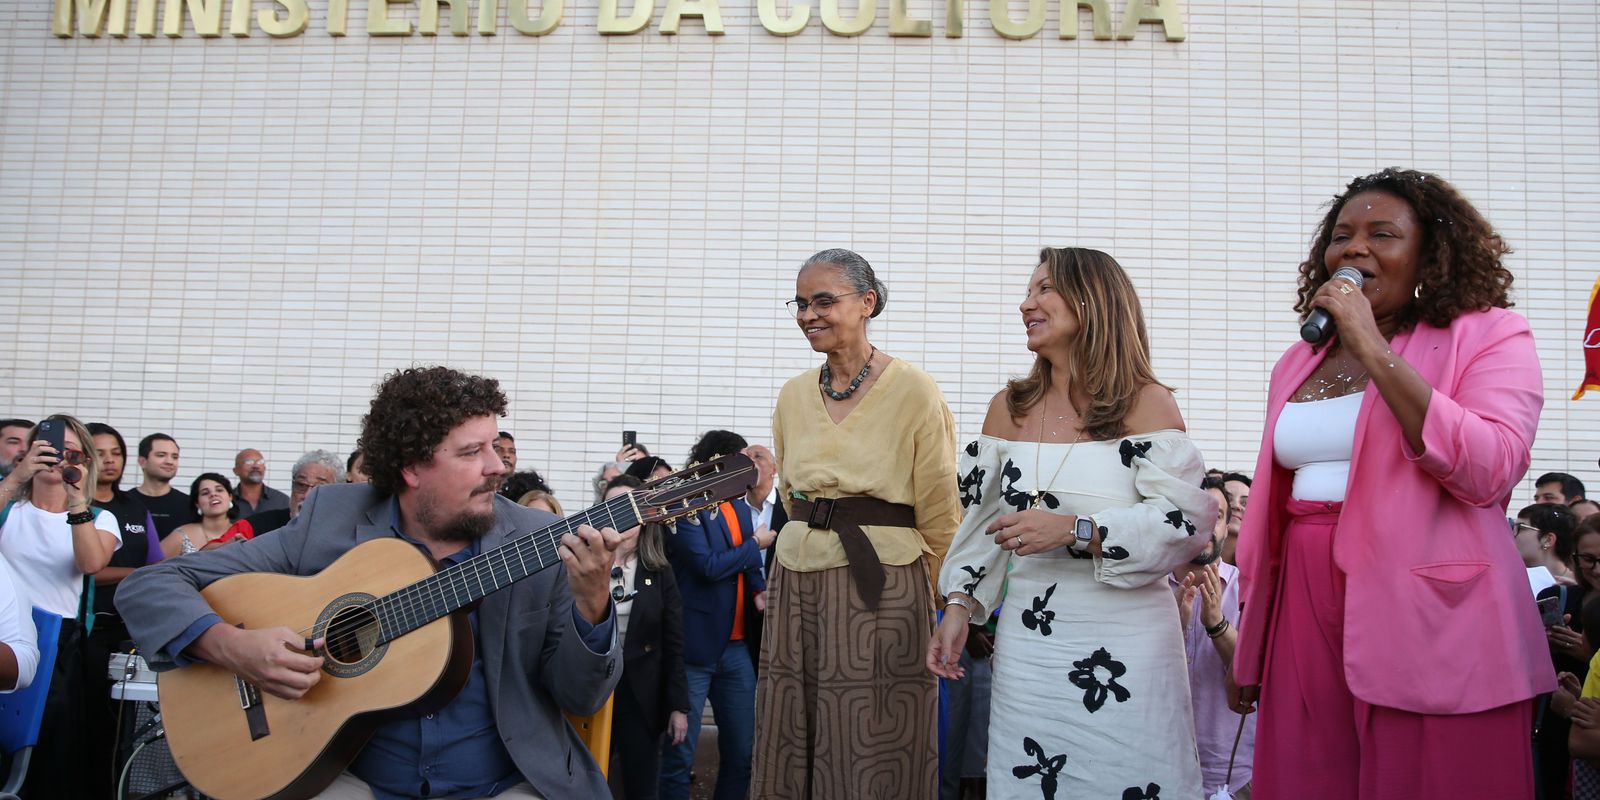 Culture belongs to the Brazilian people and needs to be respected, says minister